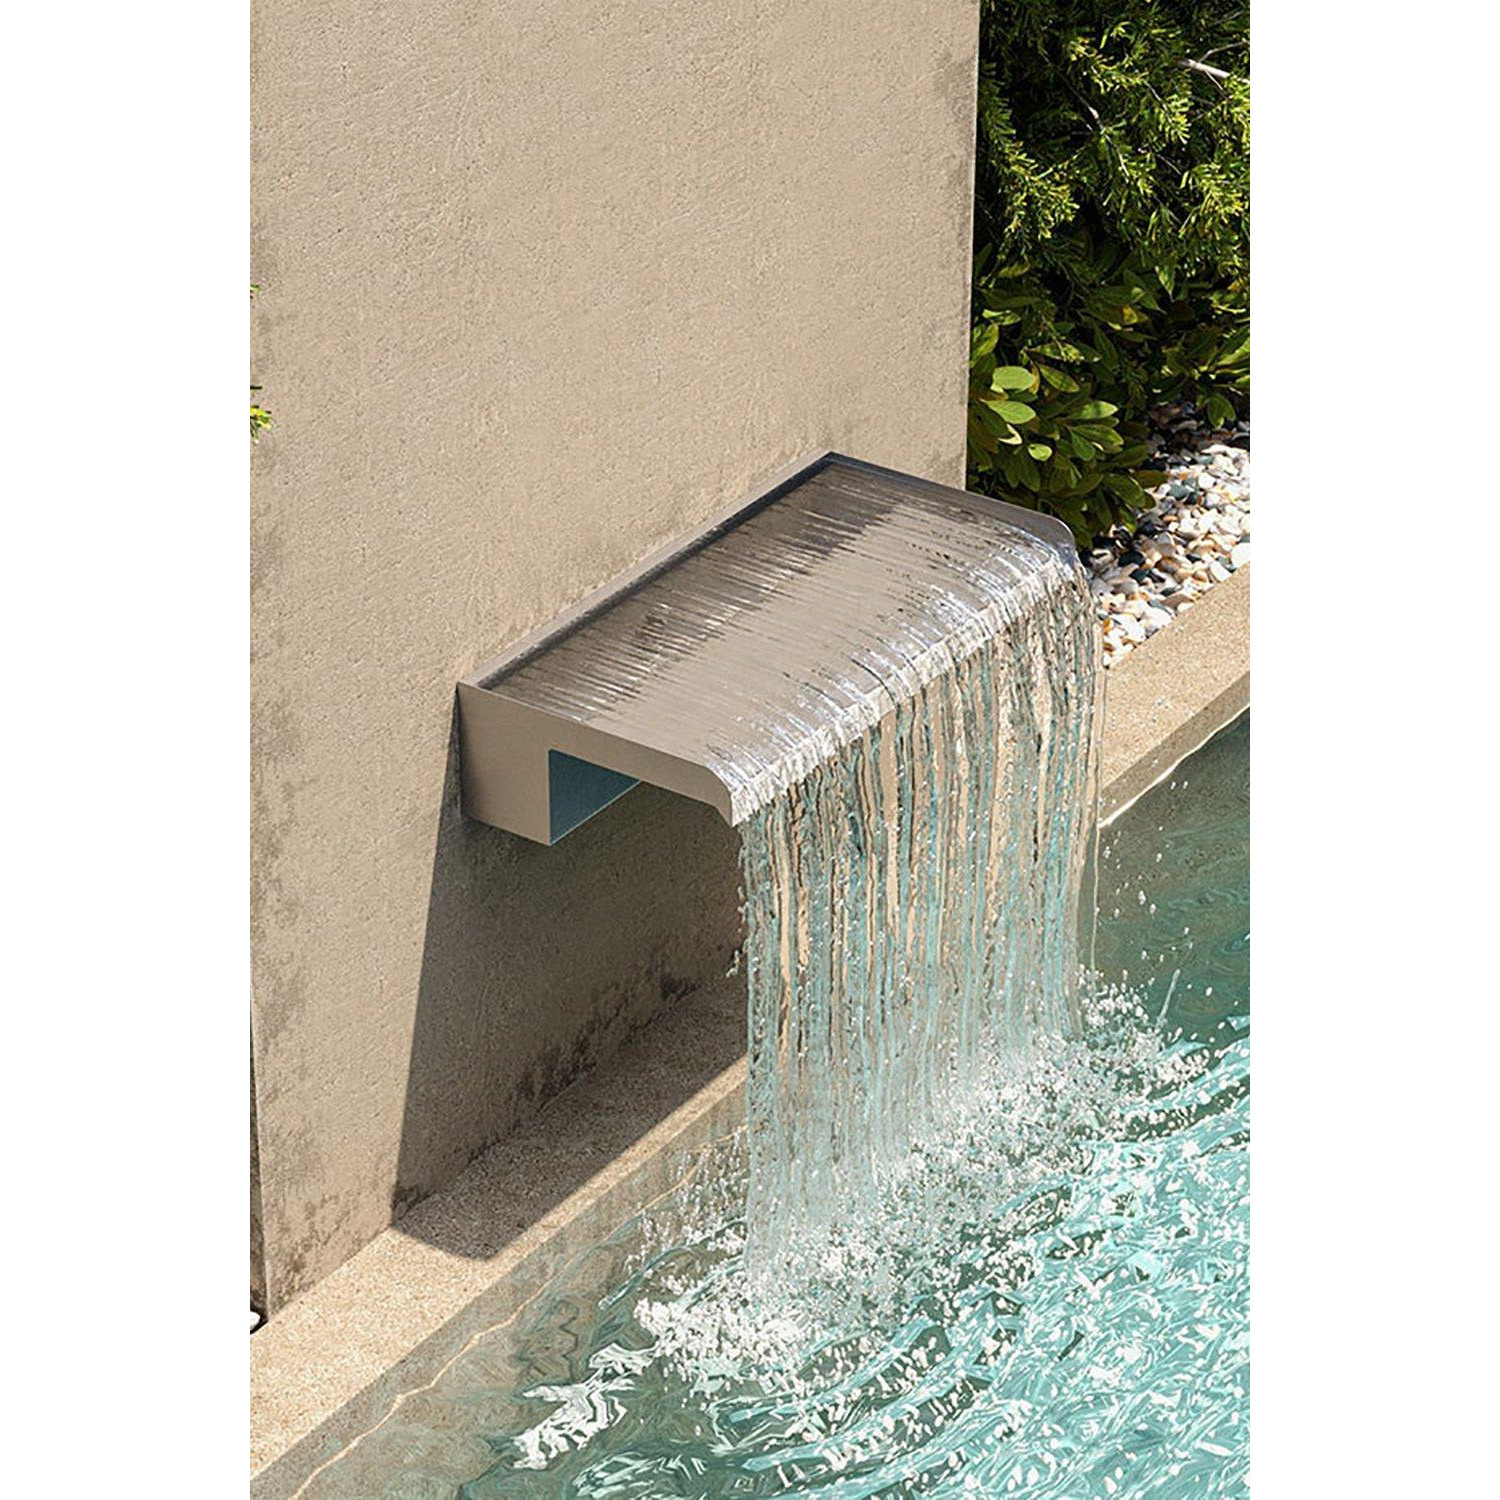 40cm W x 20cm D Waterfall Pool Fountain Garden Stainless Steel Wall-Mounted Water Blade - image 1